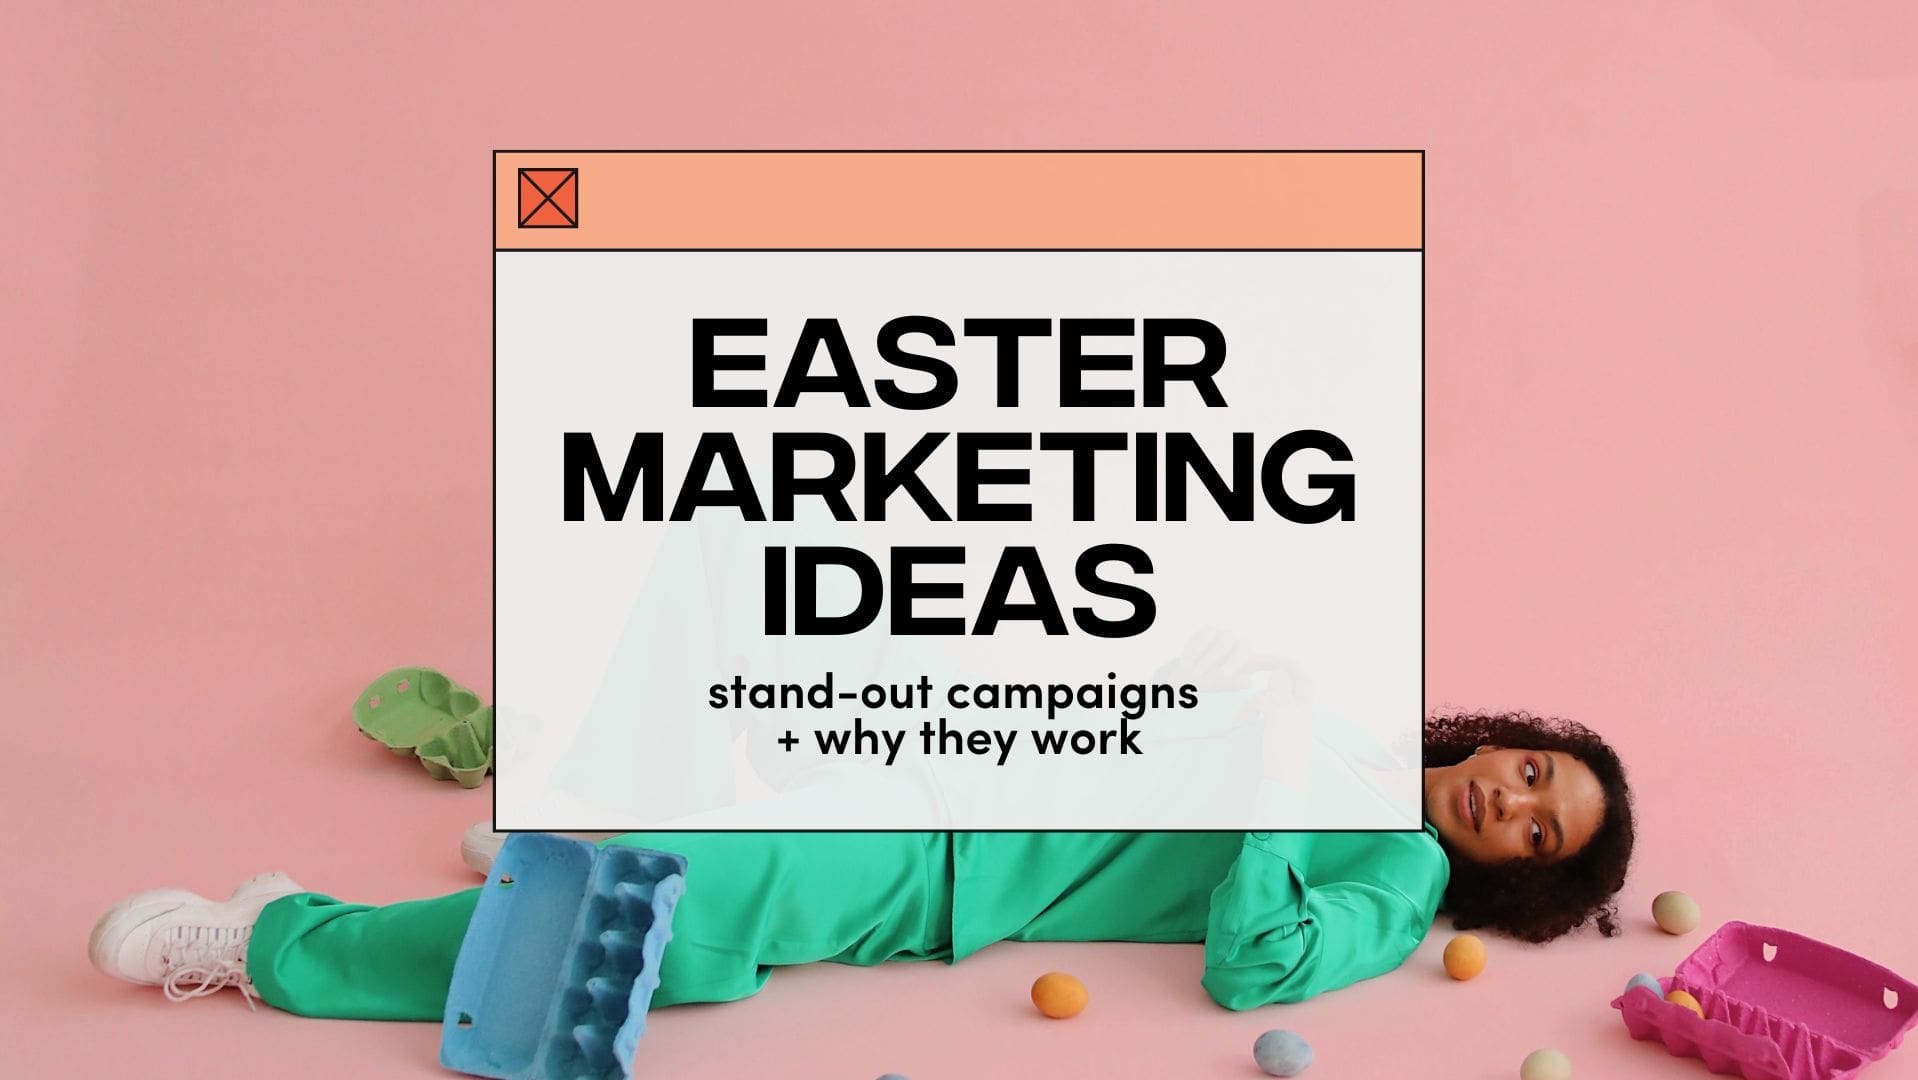 Easter Marketing Ideas Stand Out Campaigns Why They Work